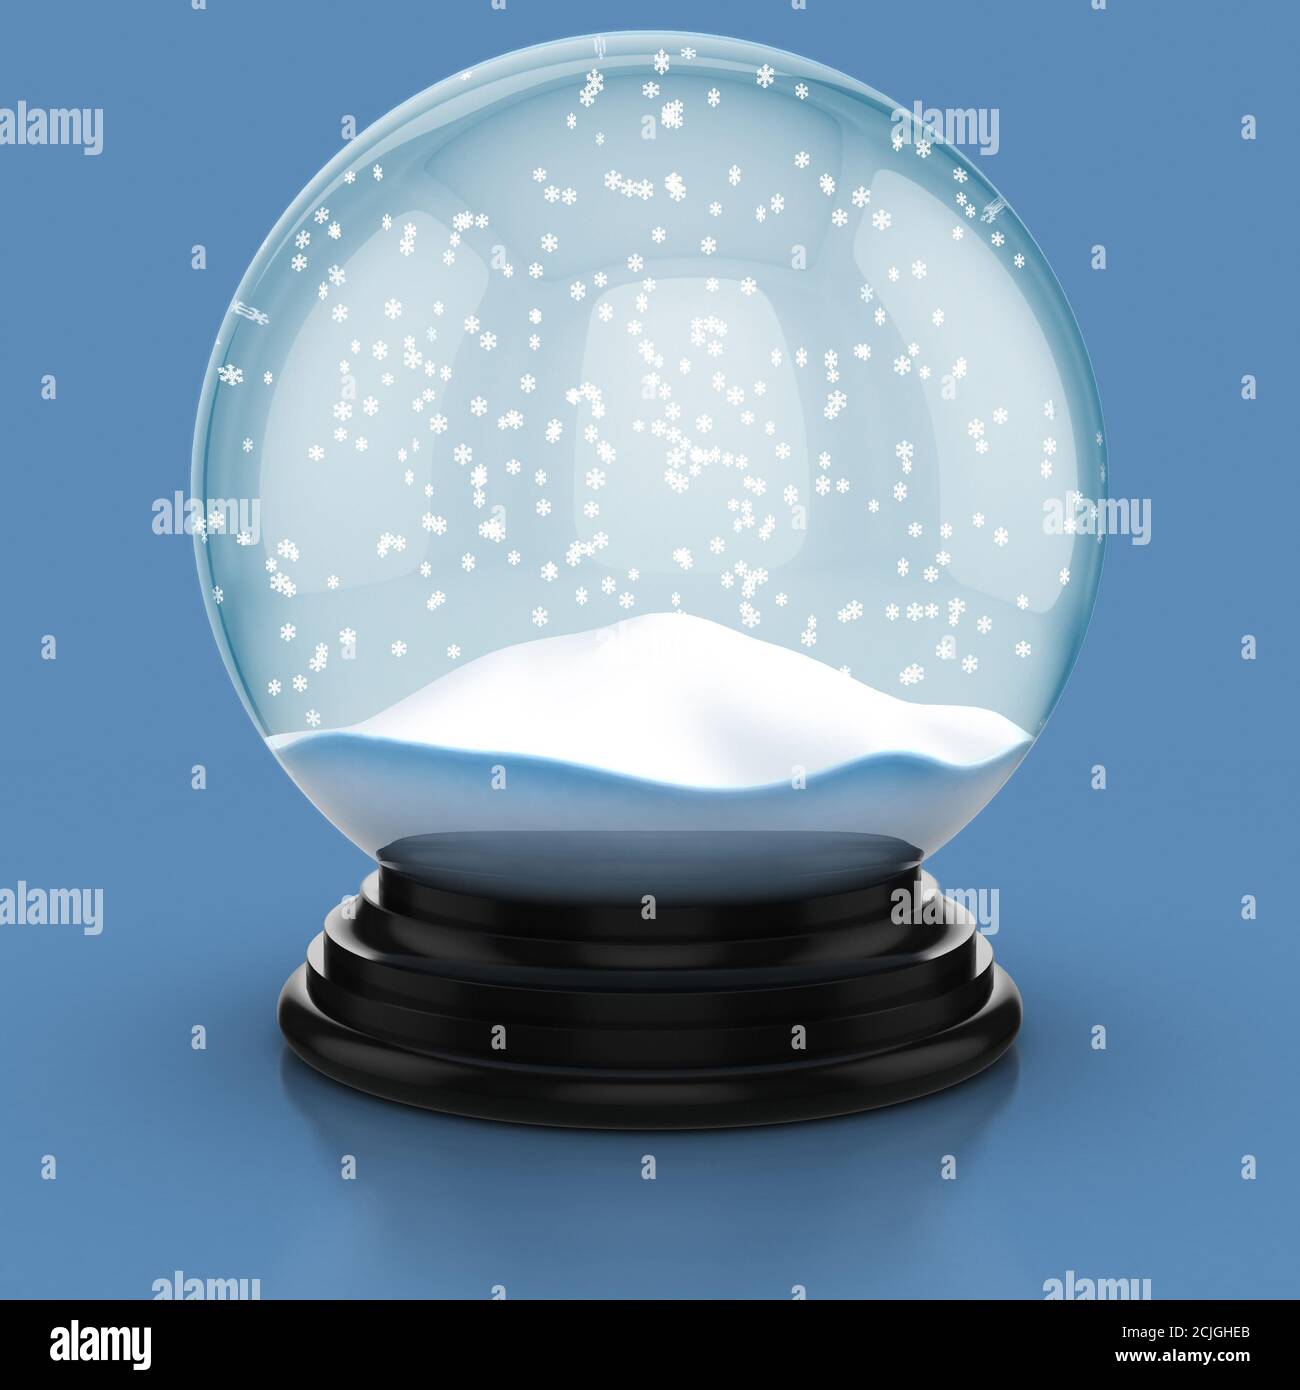 empty snow dome over blue background Stock Photo